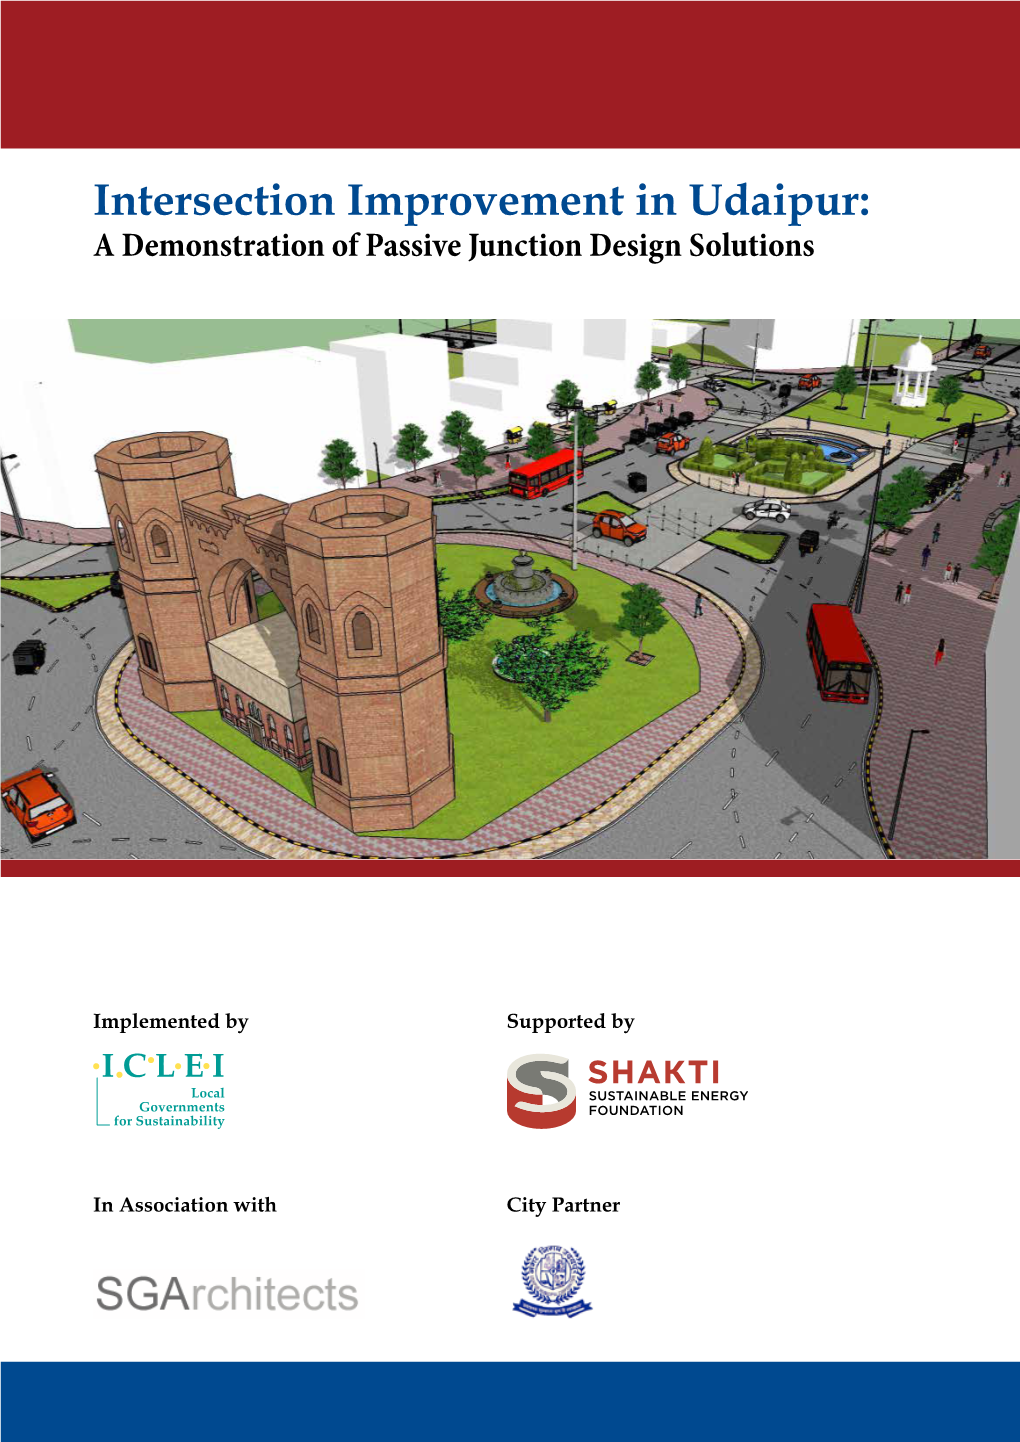 Intersection Improvement in Udaipur: a Demonstration of Passive Junction Design Solutions